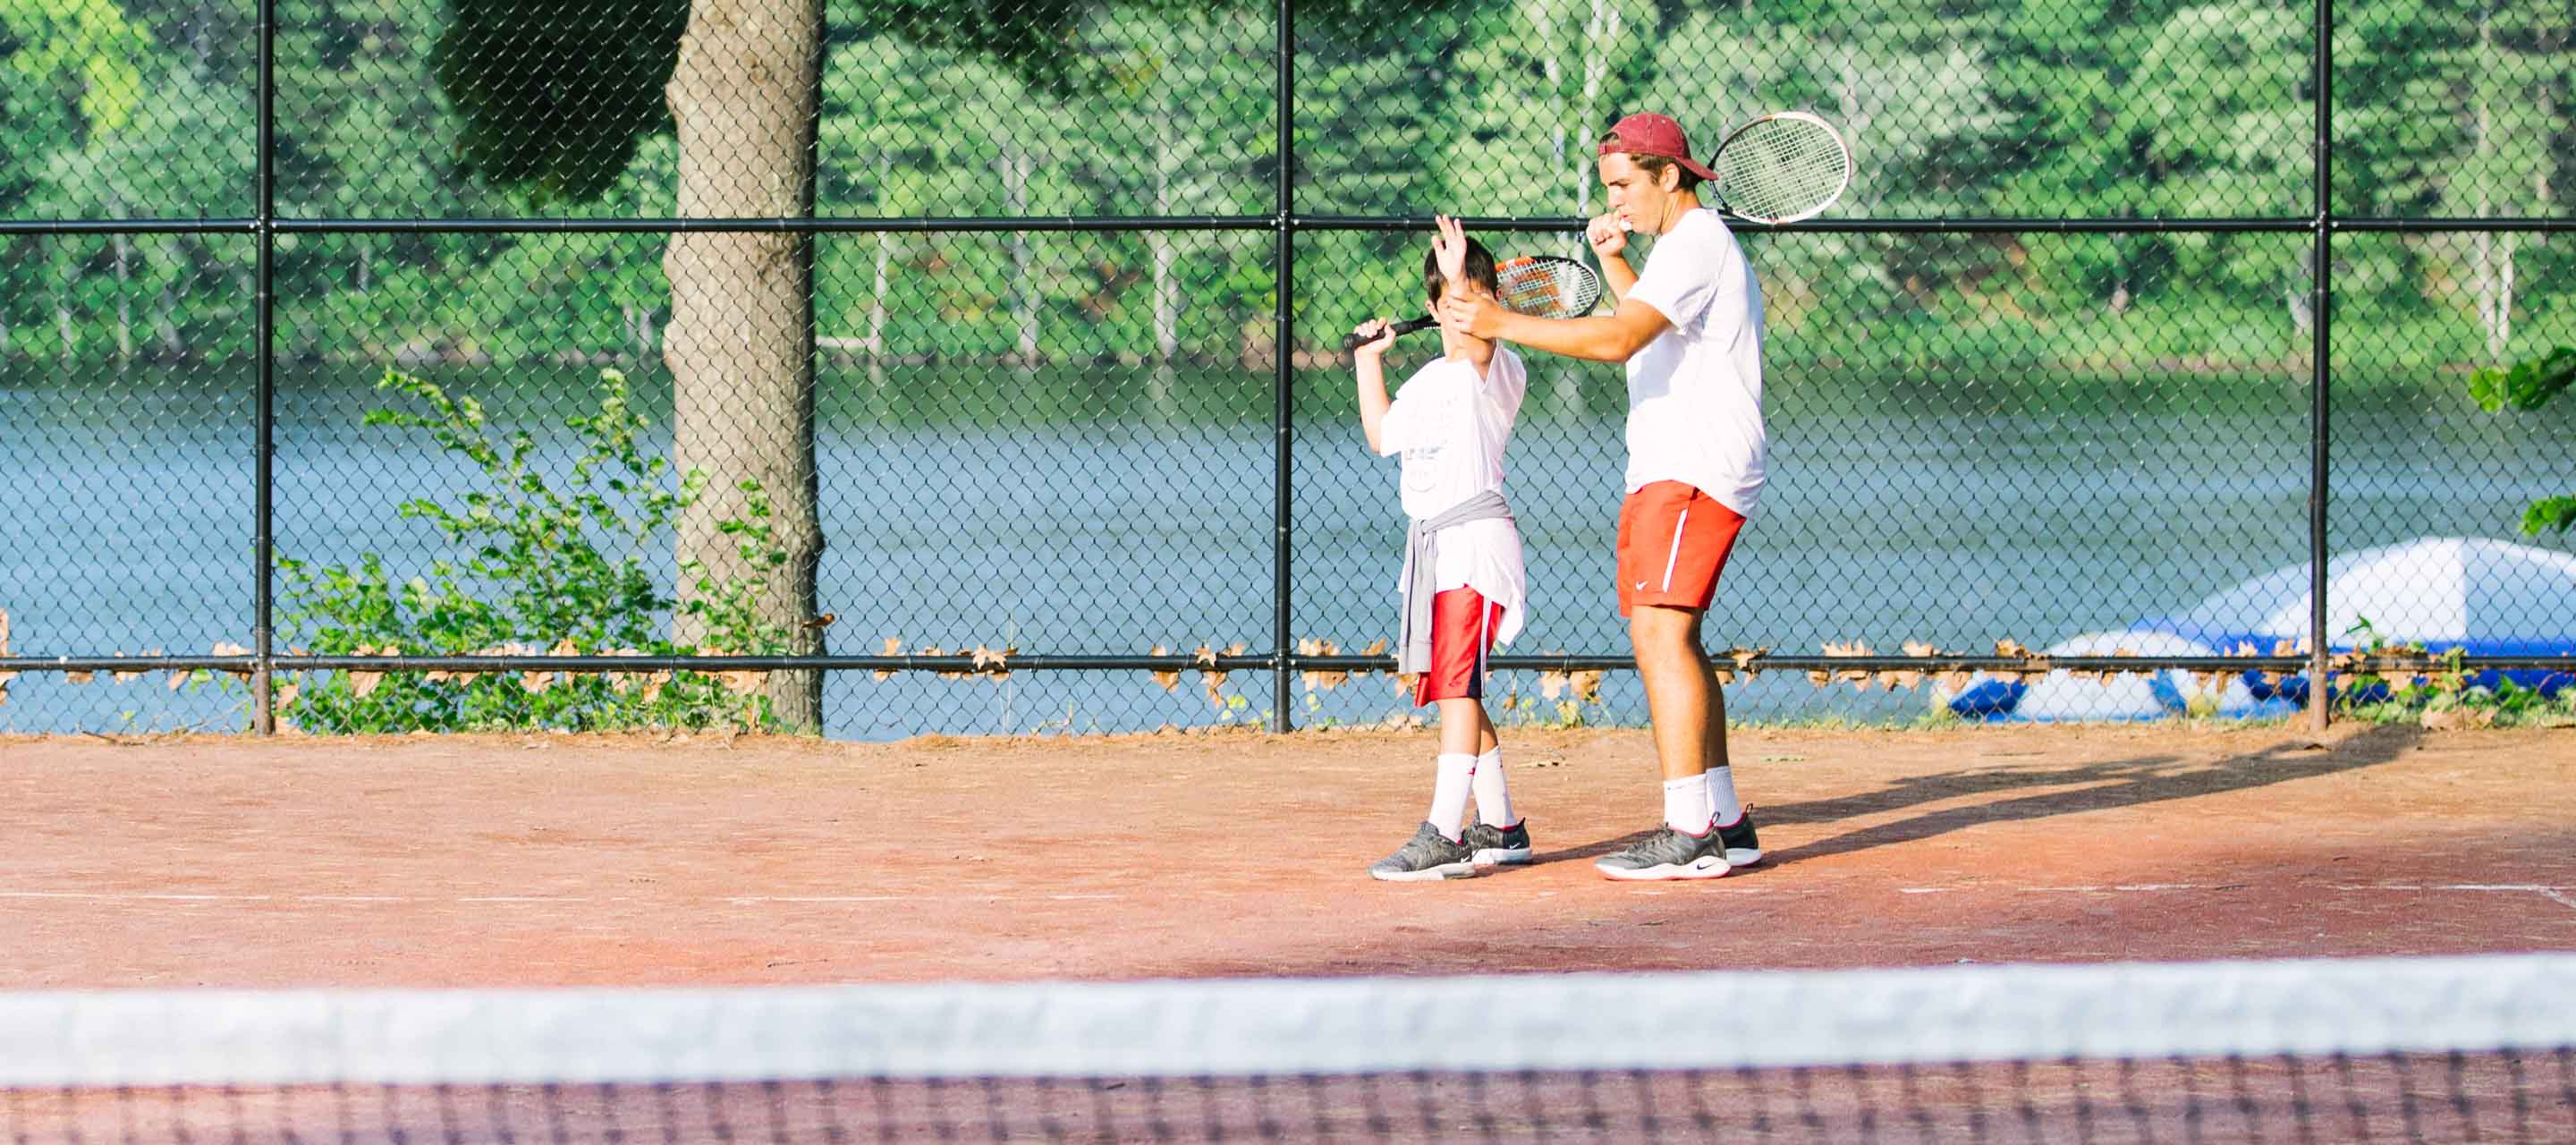 Tennis specialist teaching camper how to serve